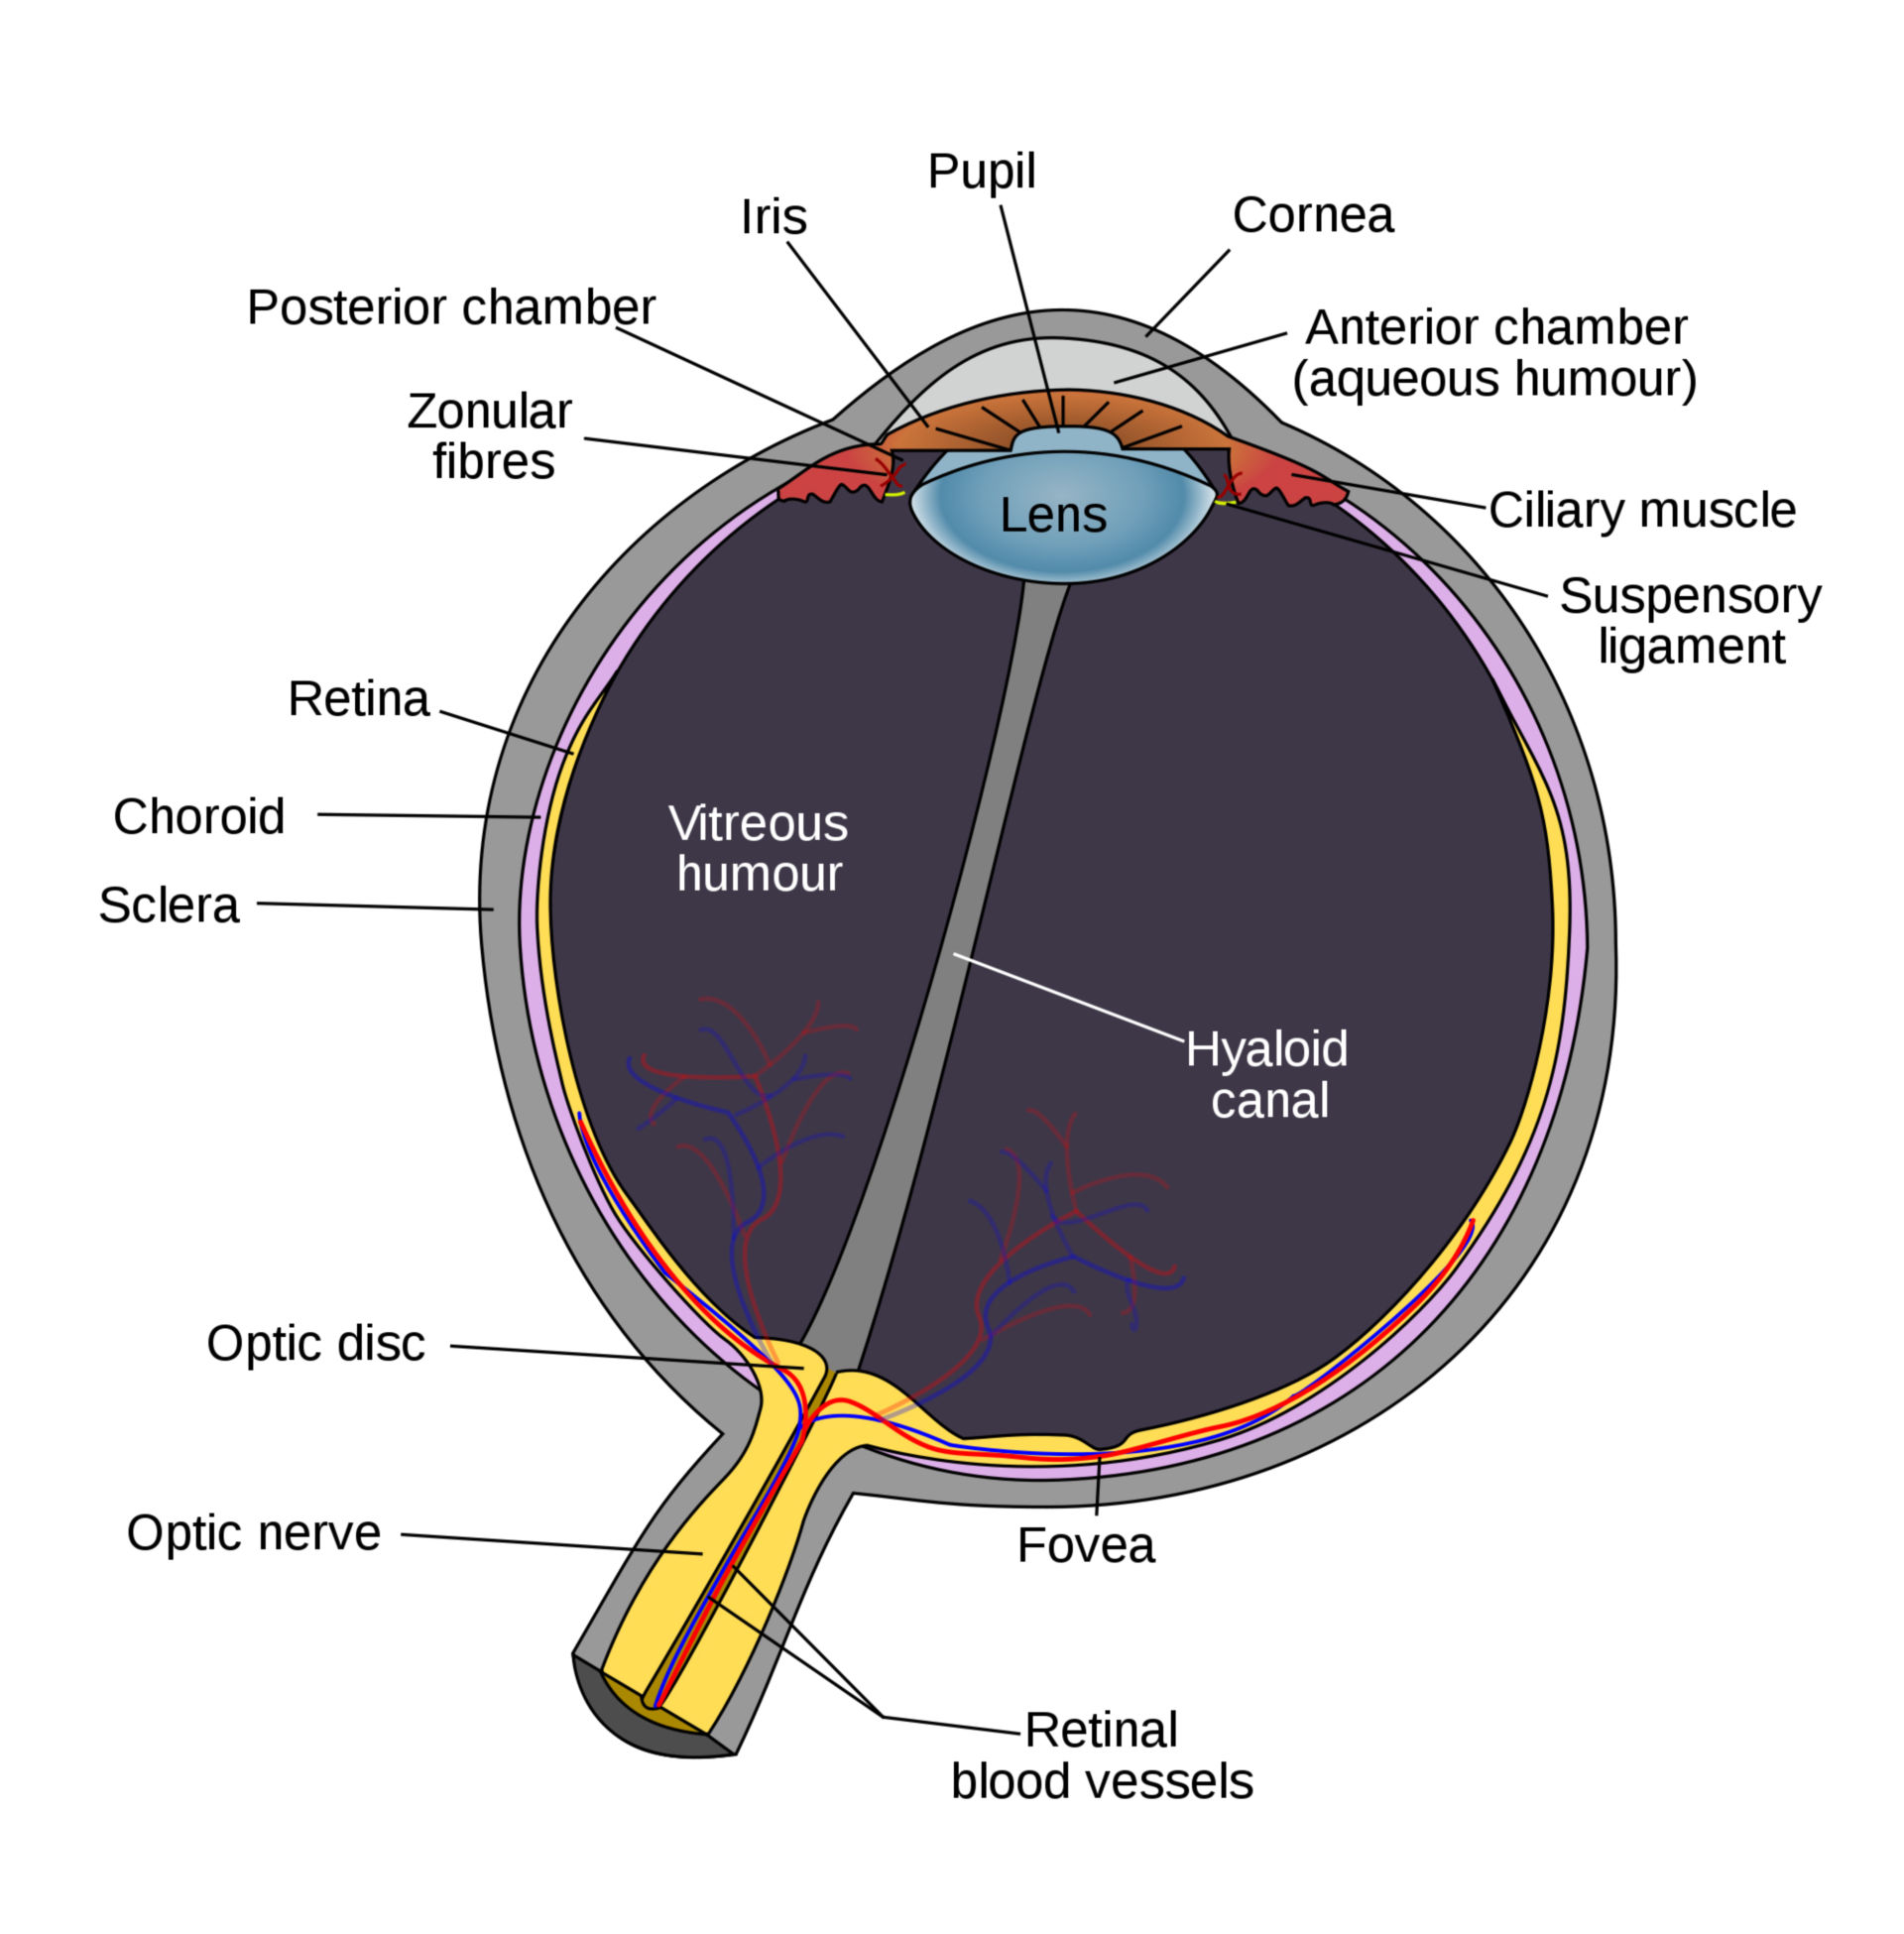 Schematic of the eye